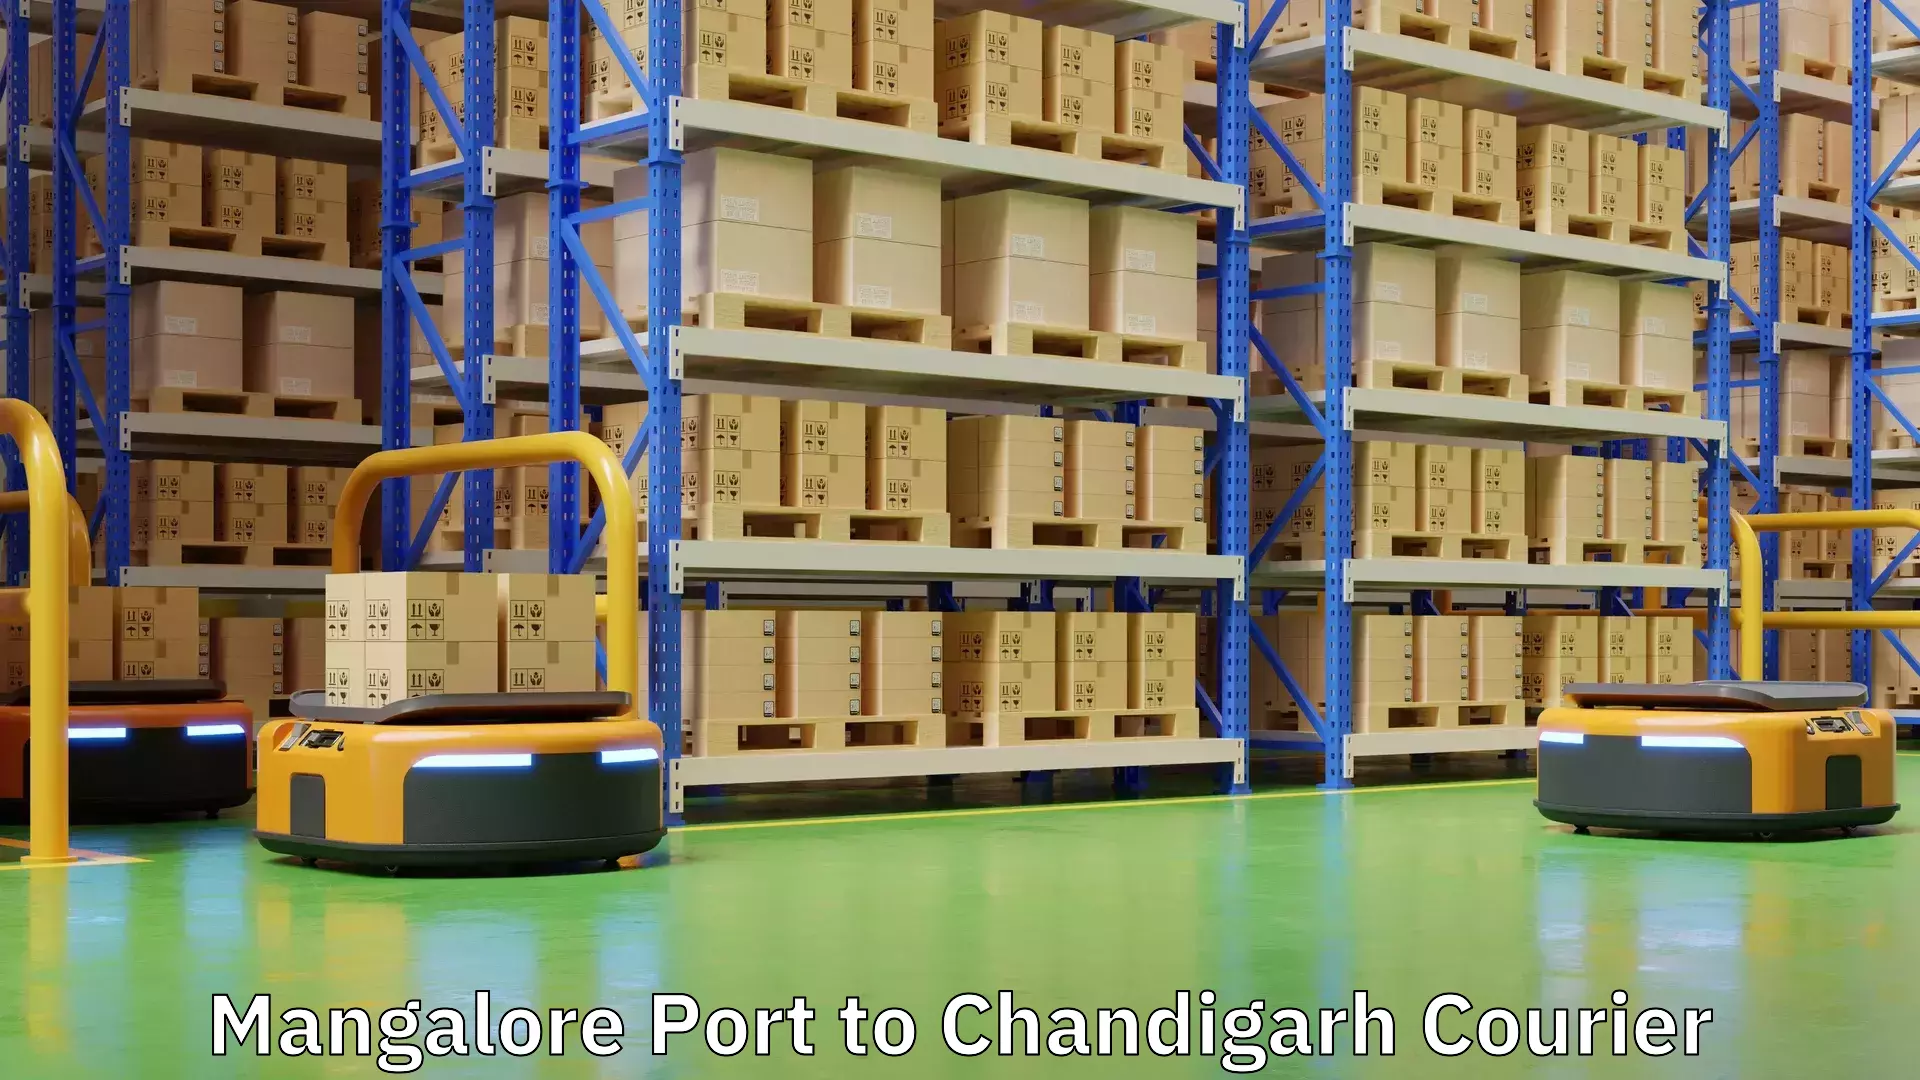 Nationwide delivery network Mangalore Port to Chandigarh